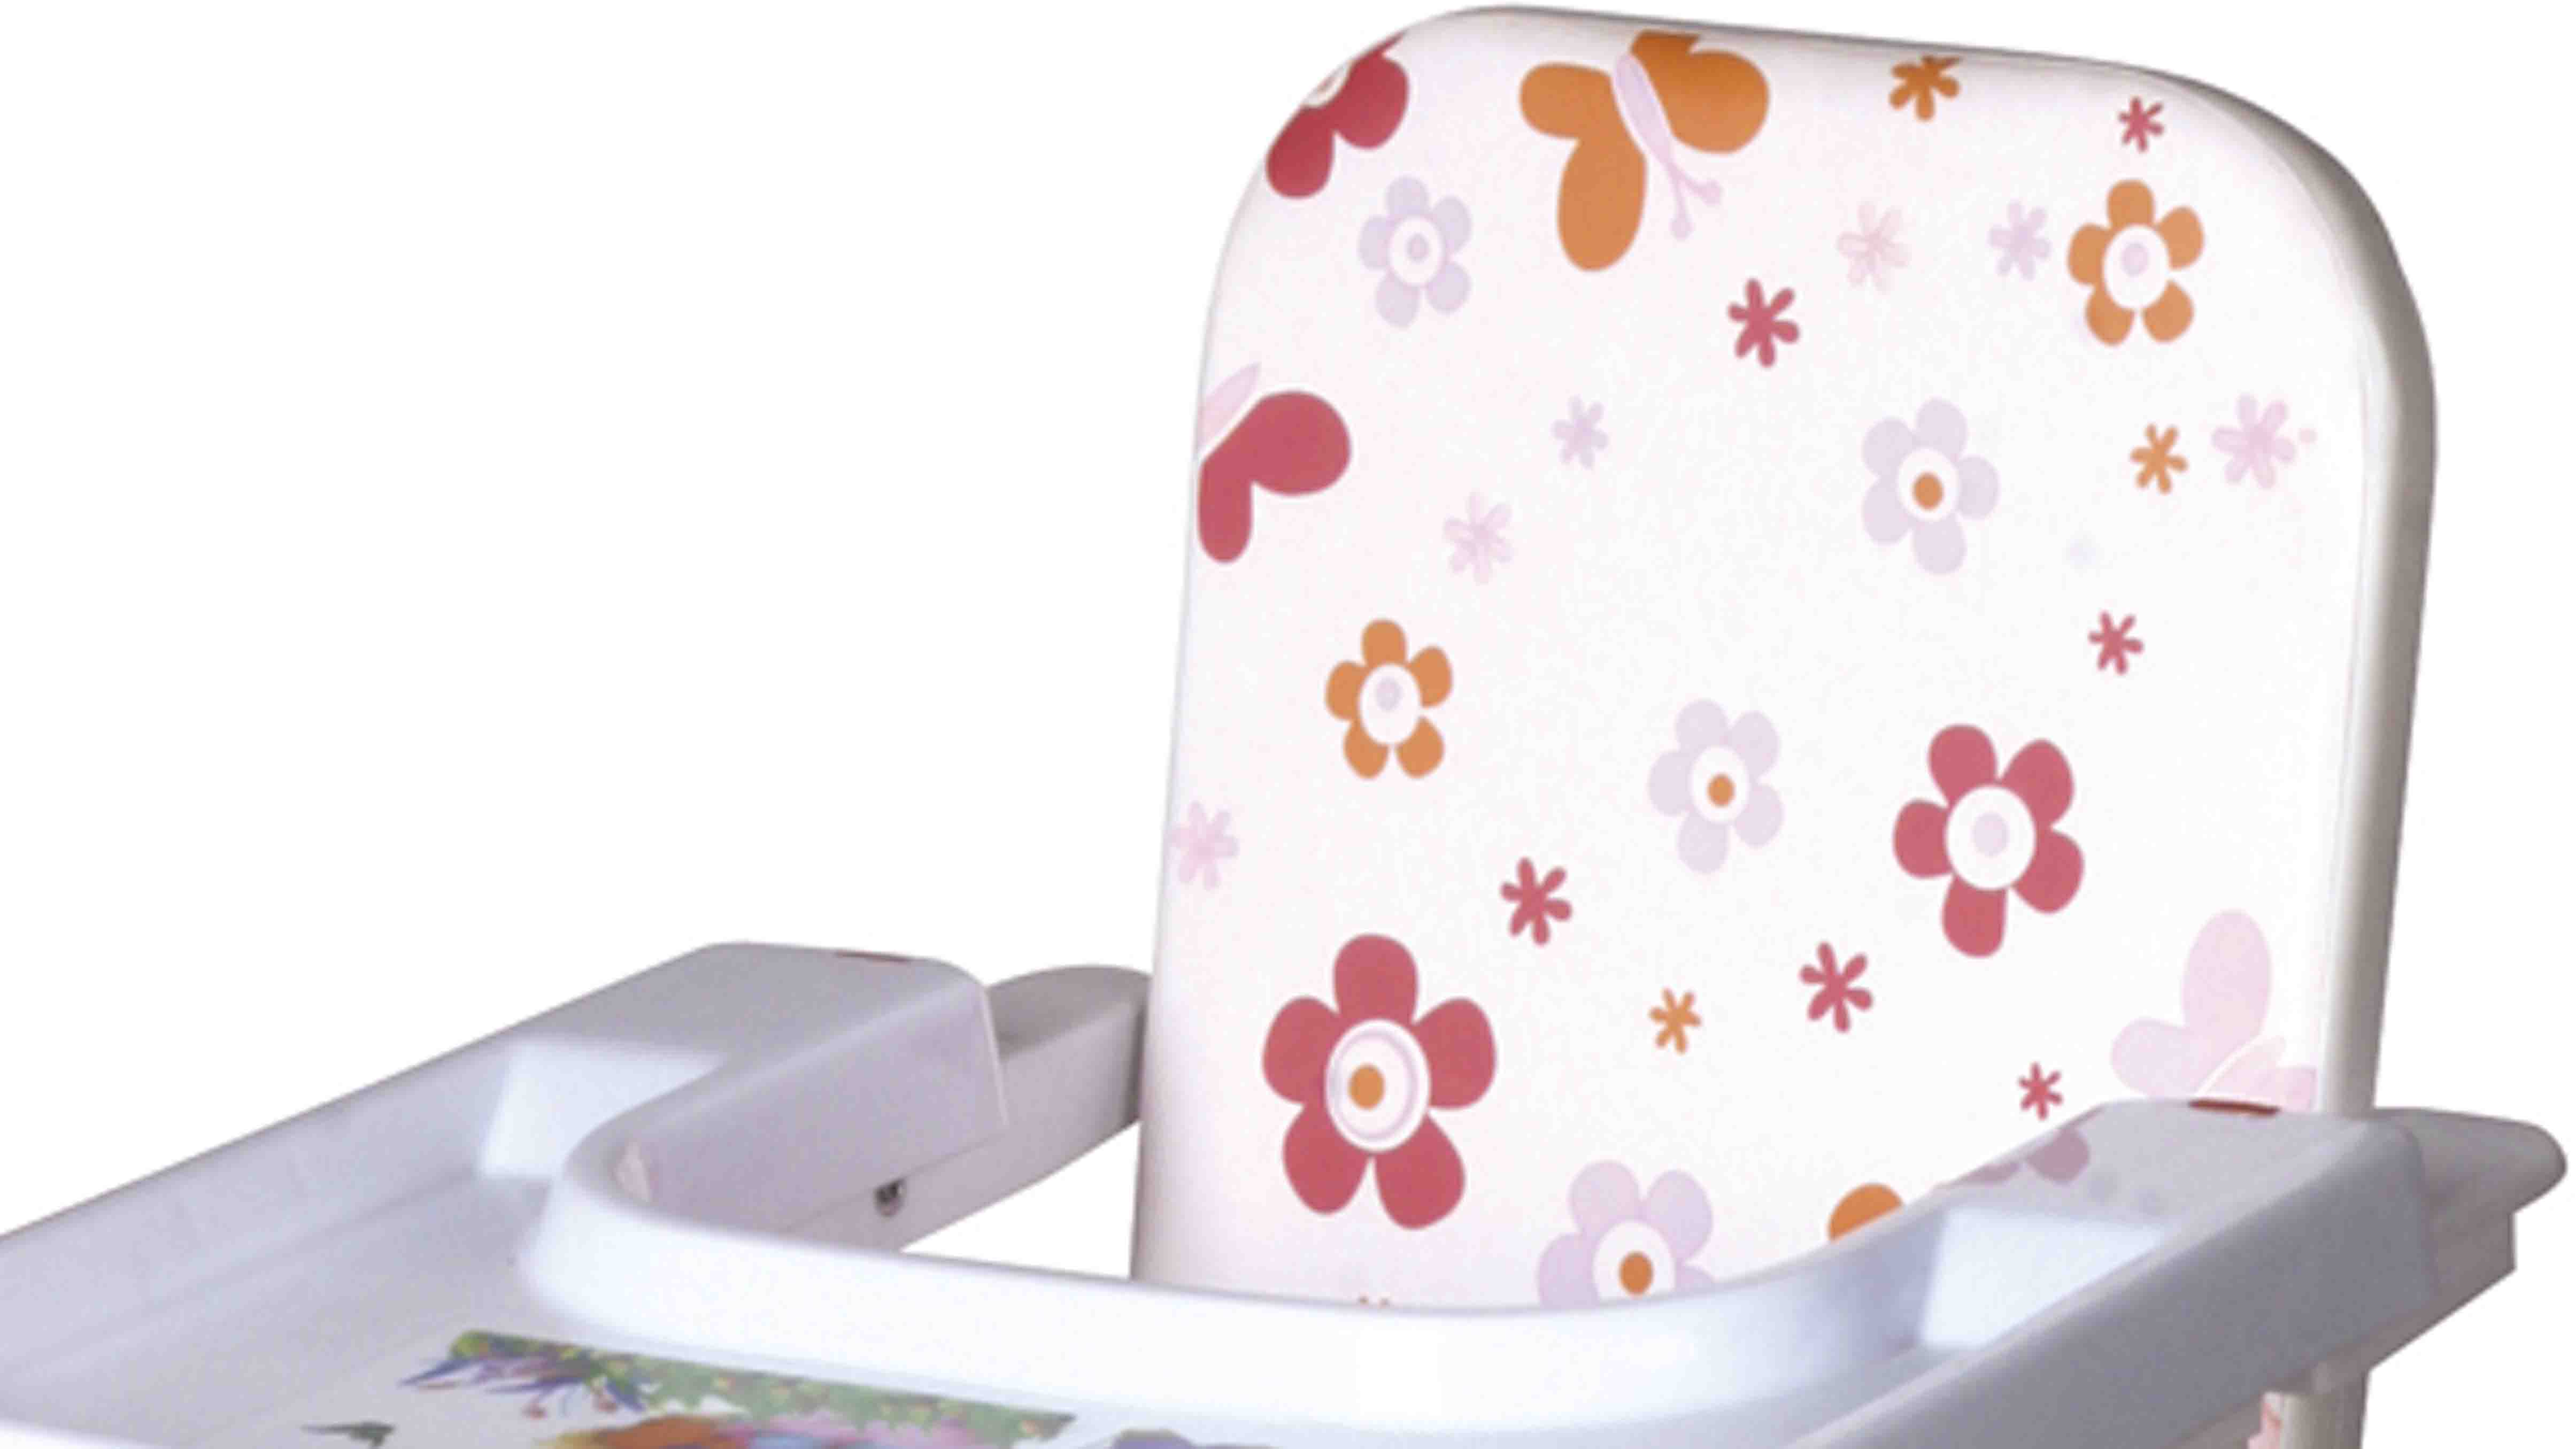 adjustable stable child high chair plastic Aoqi Brand company